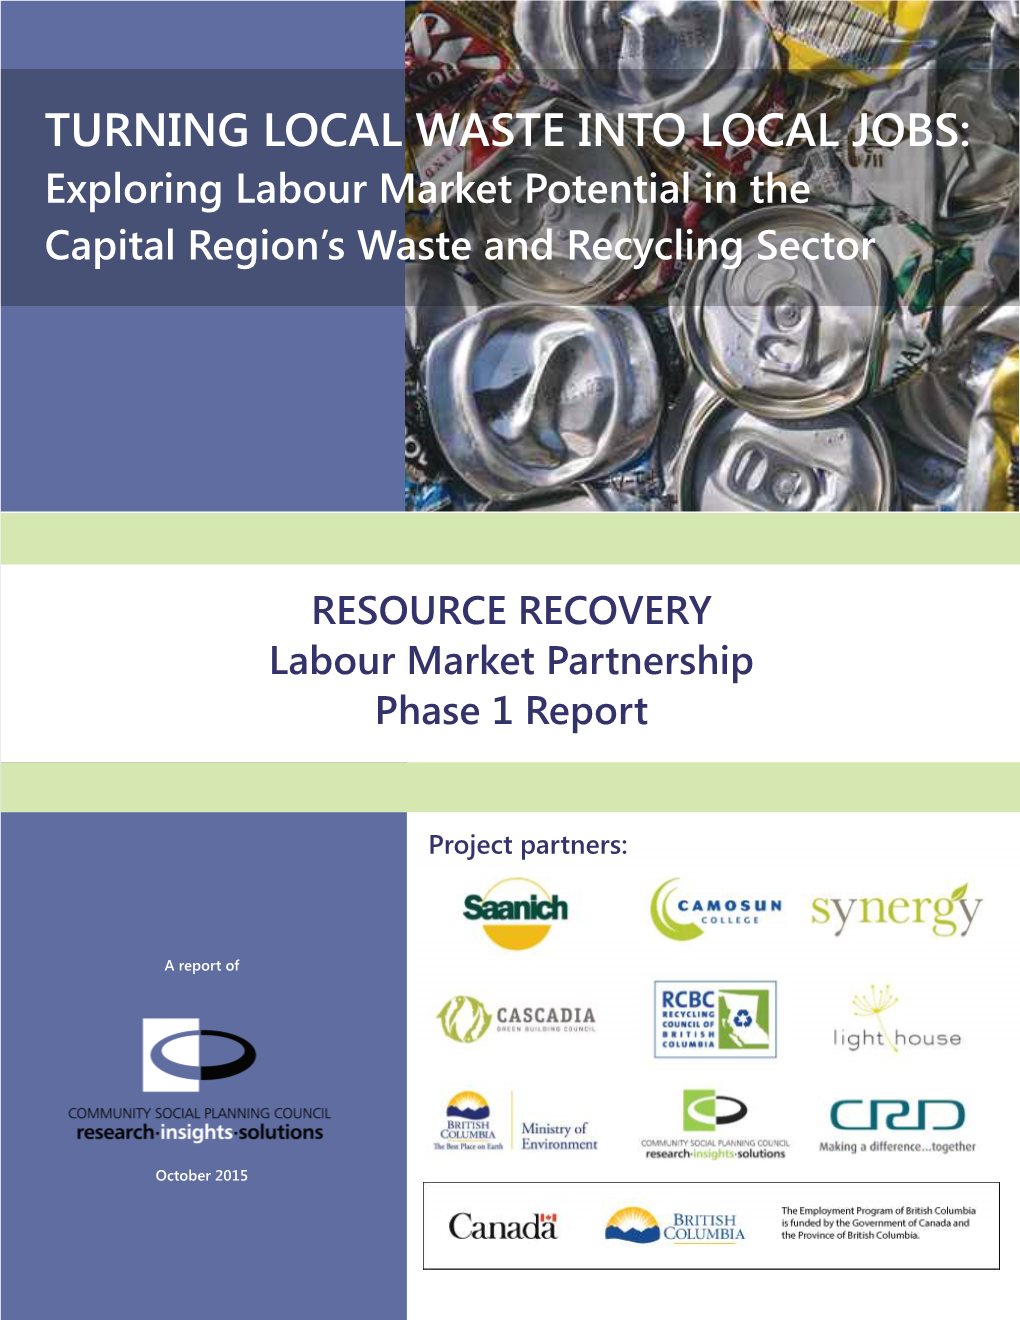 TURNING LOCAL WASTE INTO LOCAL JOBS: Exploring Labour Market Potential in the Capital Region’S Waste and Recycling Sector